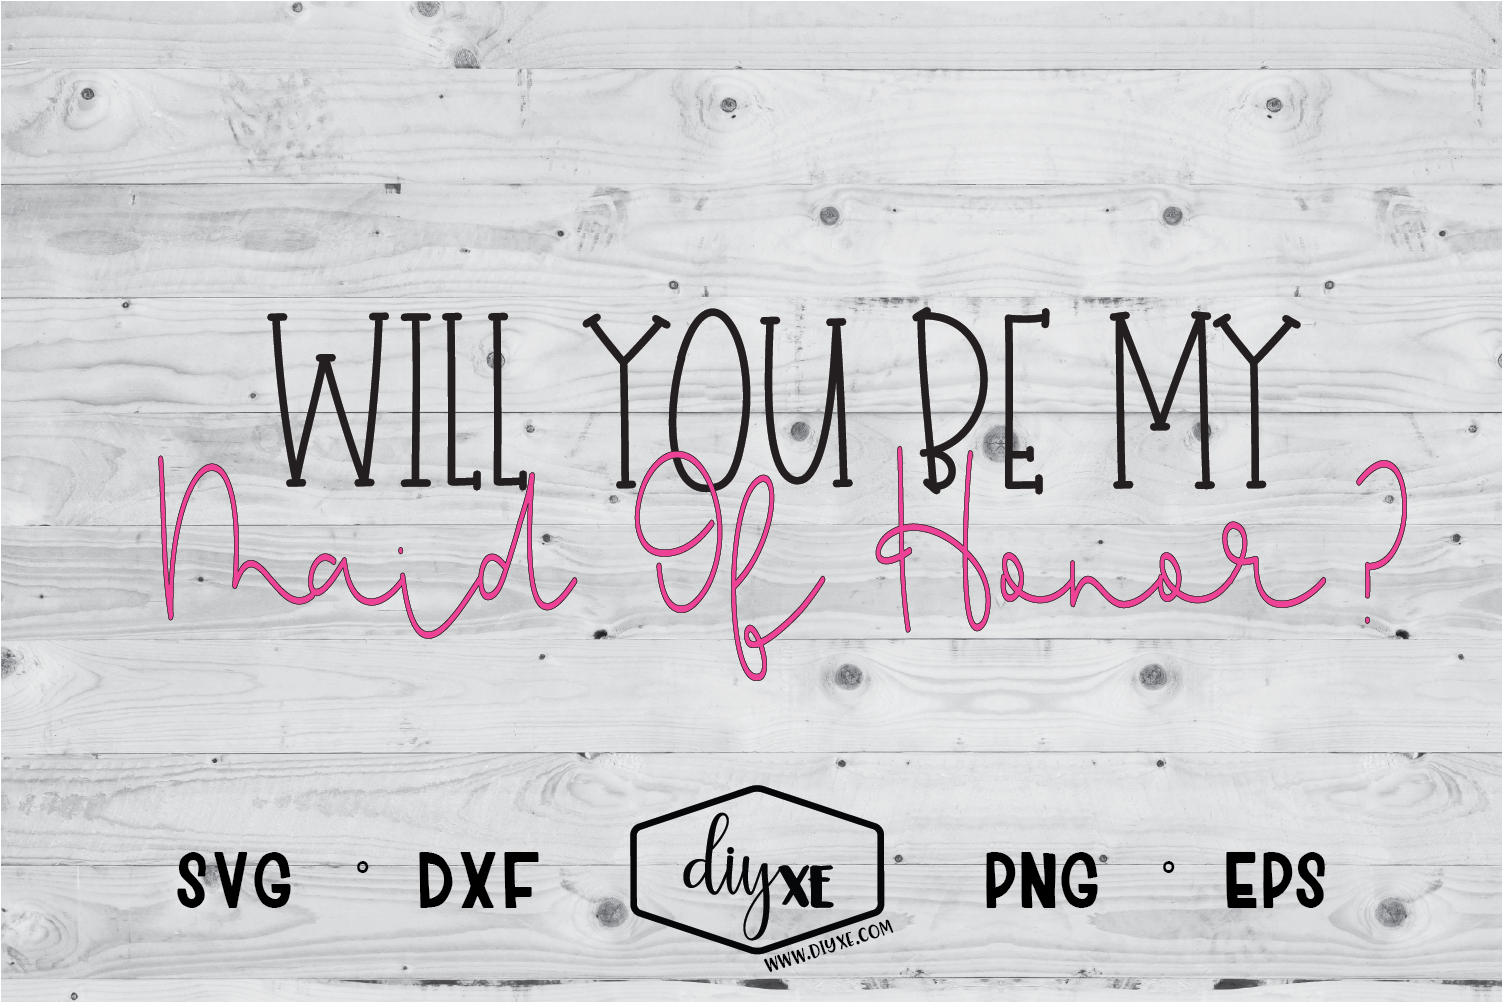 Download Will You Be My Maid Of Honor? - Wedding SVG Cut File ...